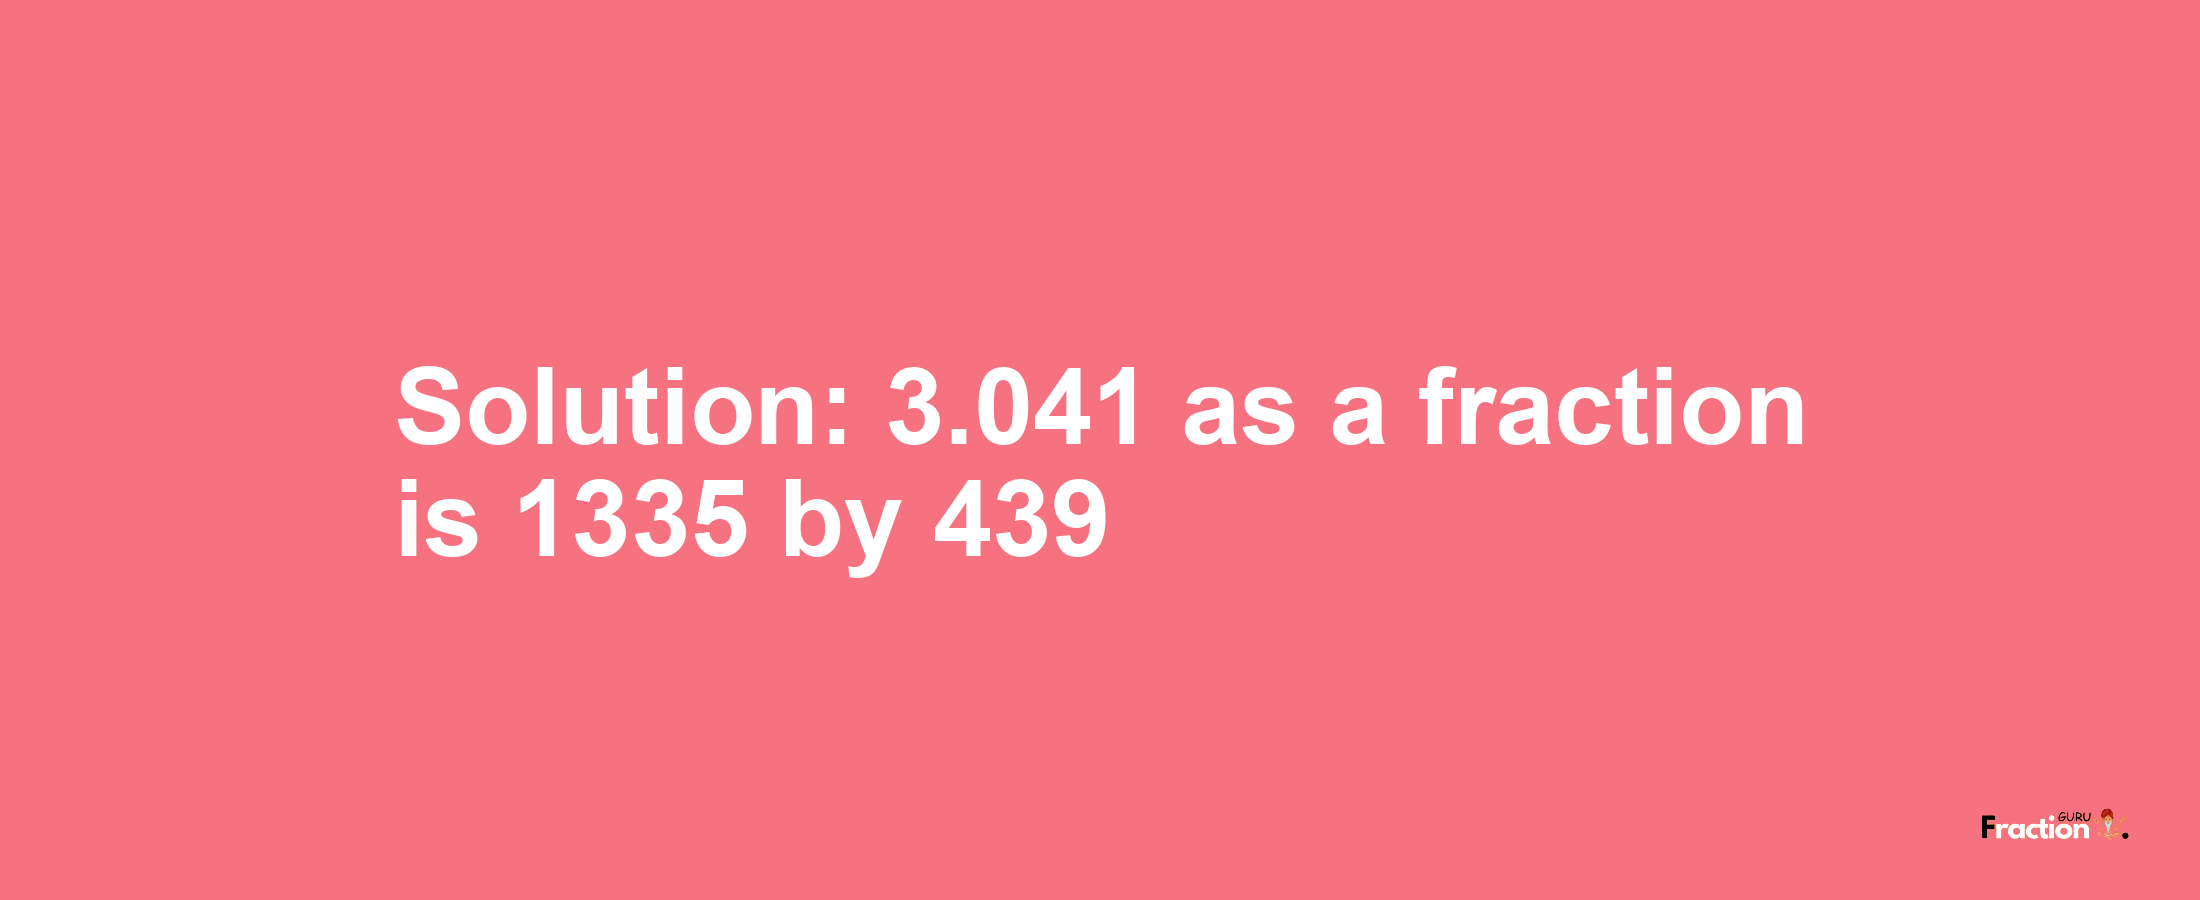 Solution:3.041 as a fraction is 1335/439